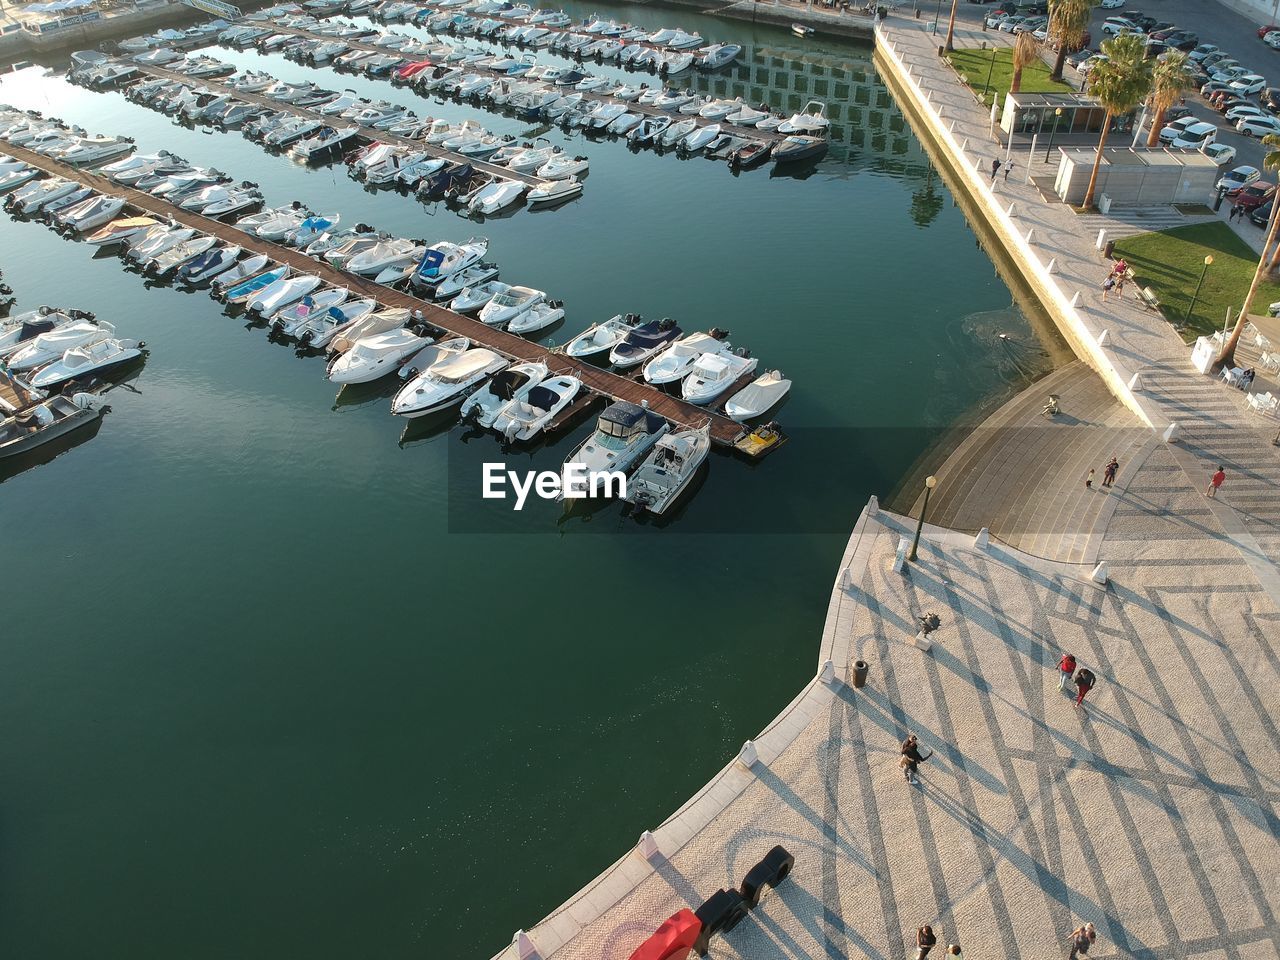 HIGH ANGLE VIEW OF PIER AT HARBOR